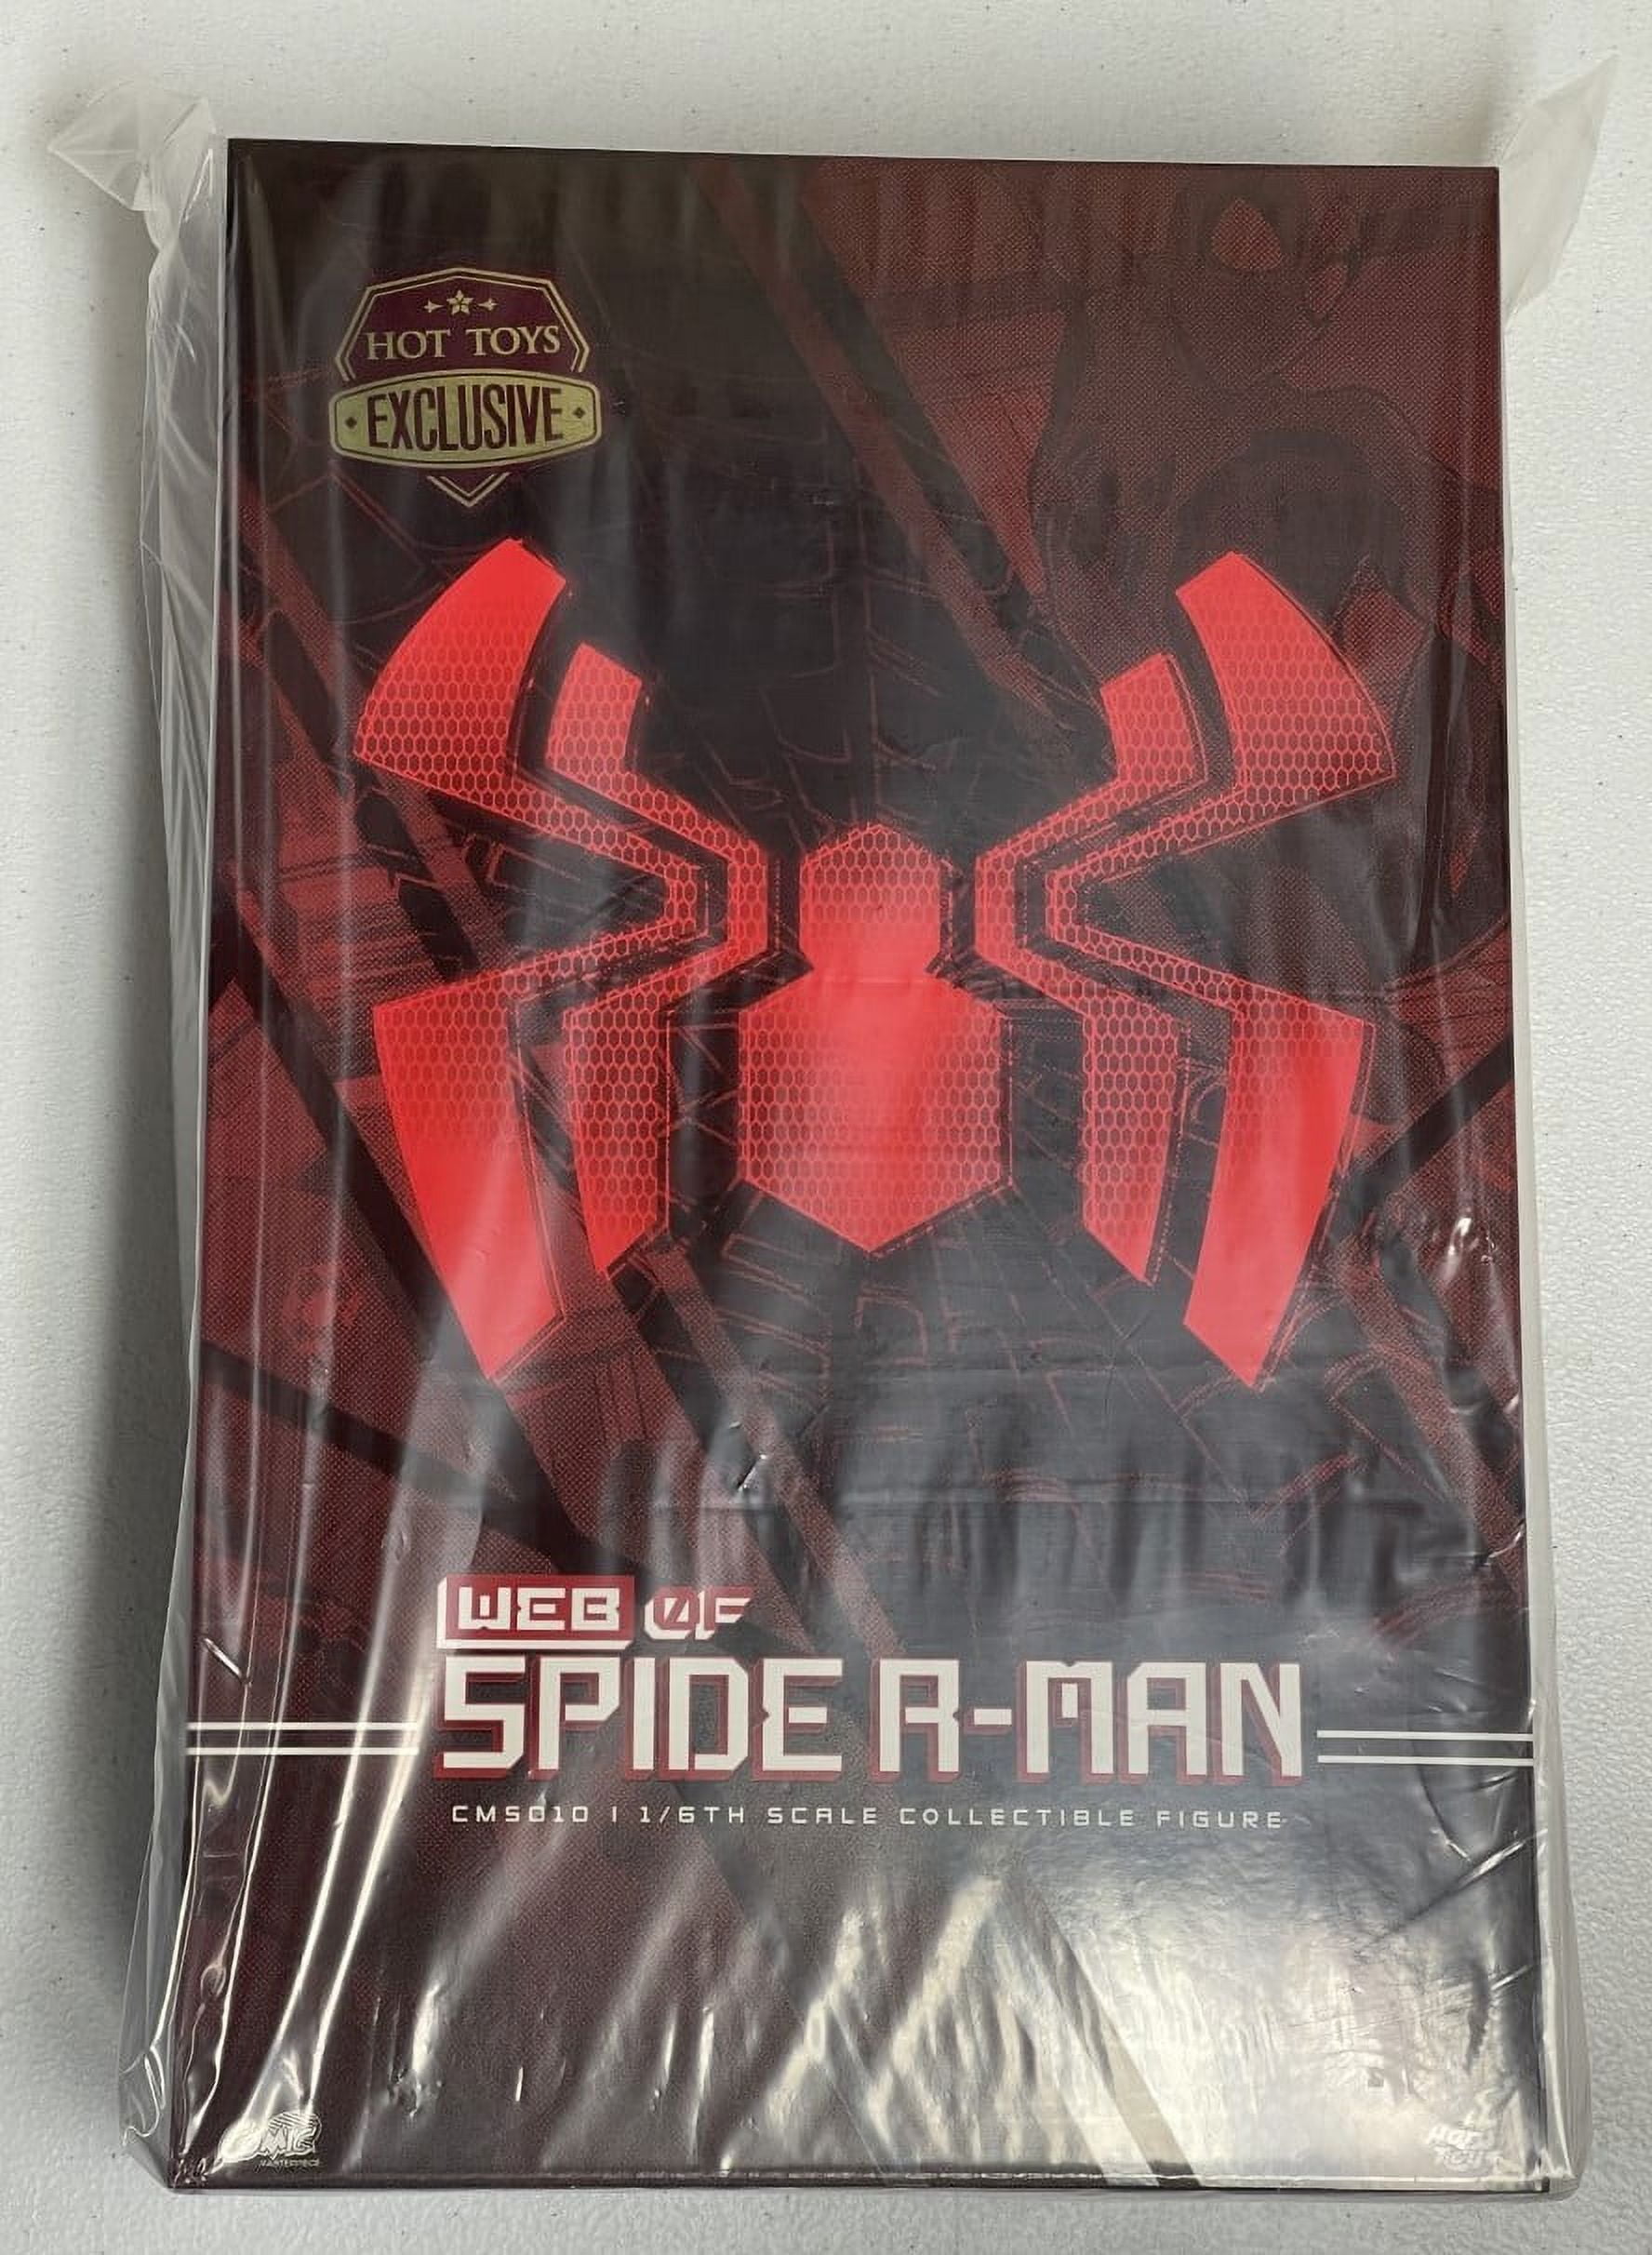 Hot Toys W.E.B. of Spider-Man - 1/6th scale Spider-Man Collectible Figure  CMS010 (Limited 210 PCS) - Toys Wonderland